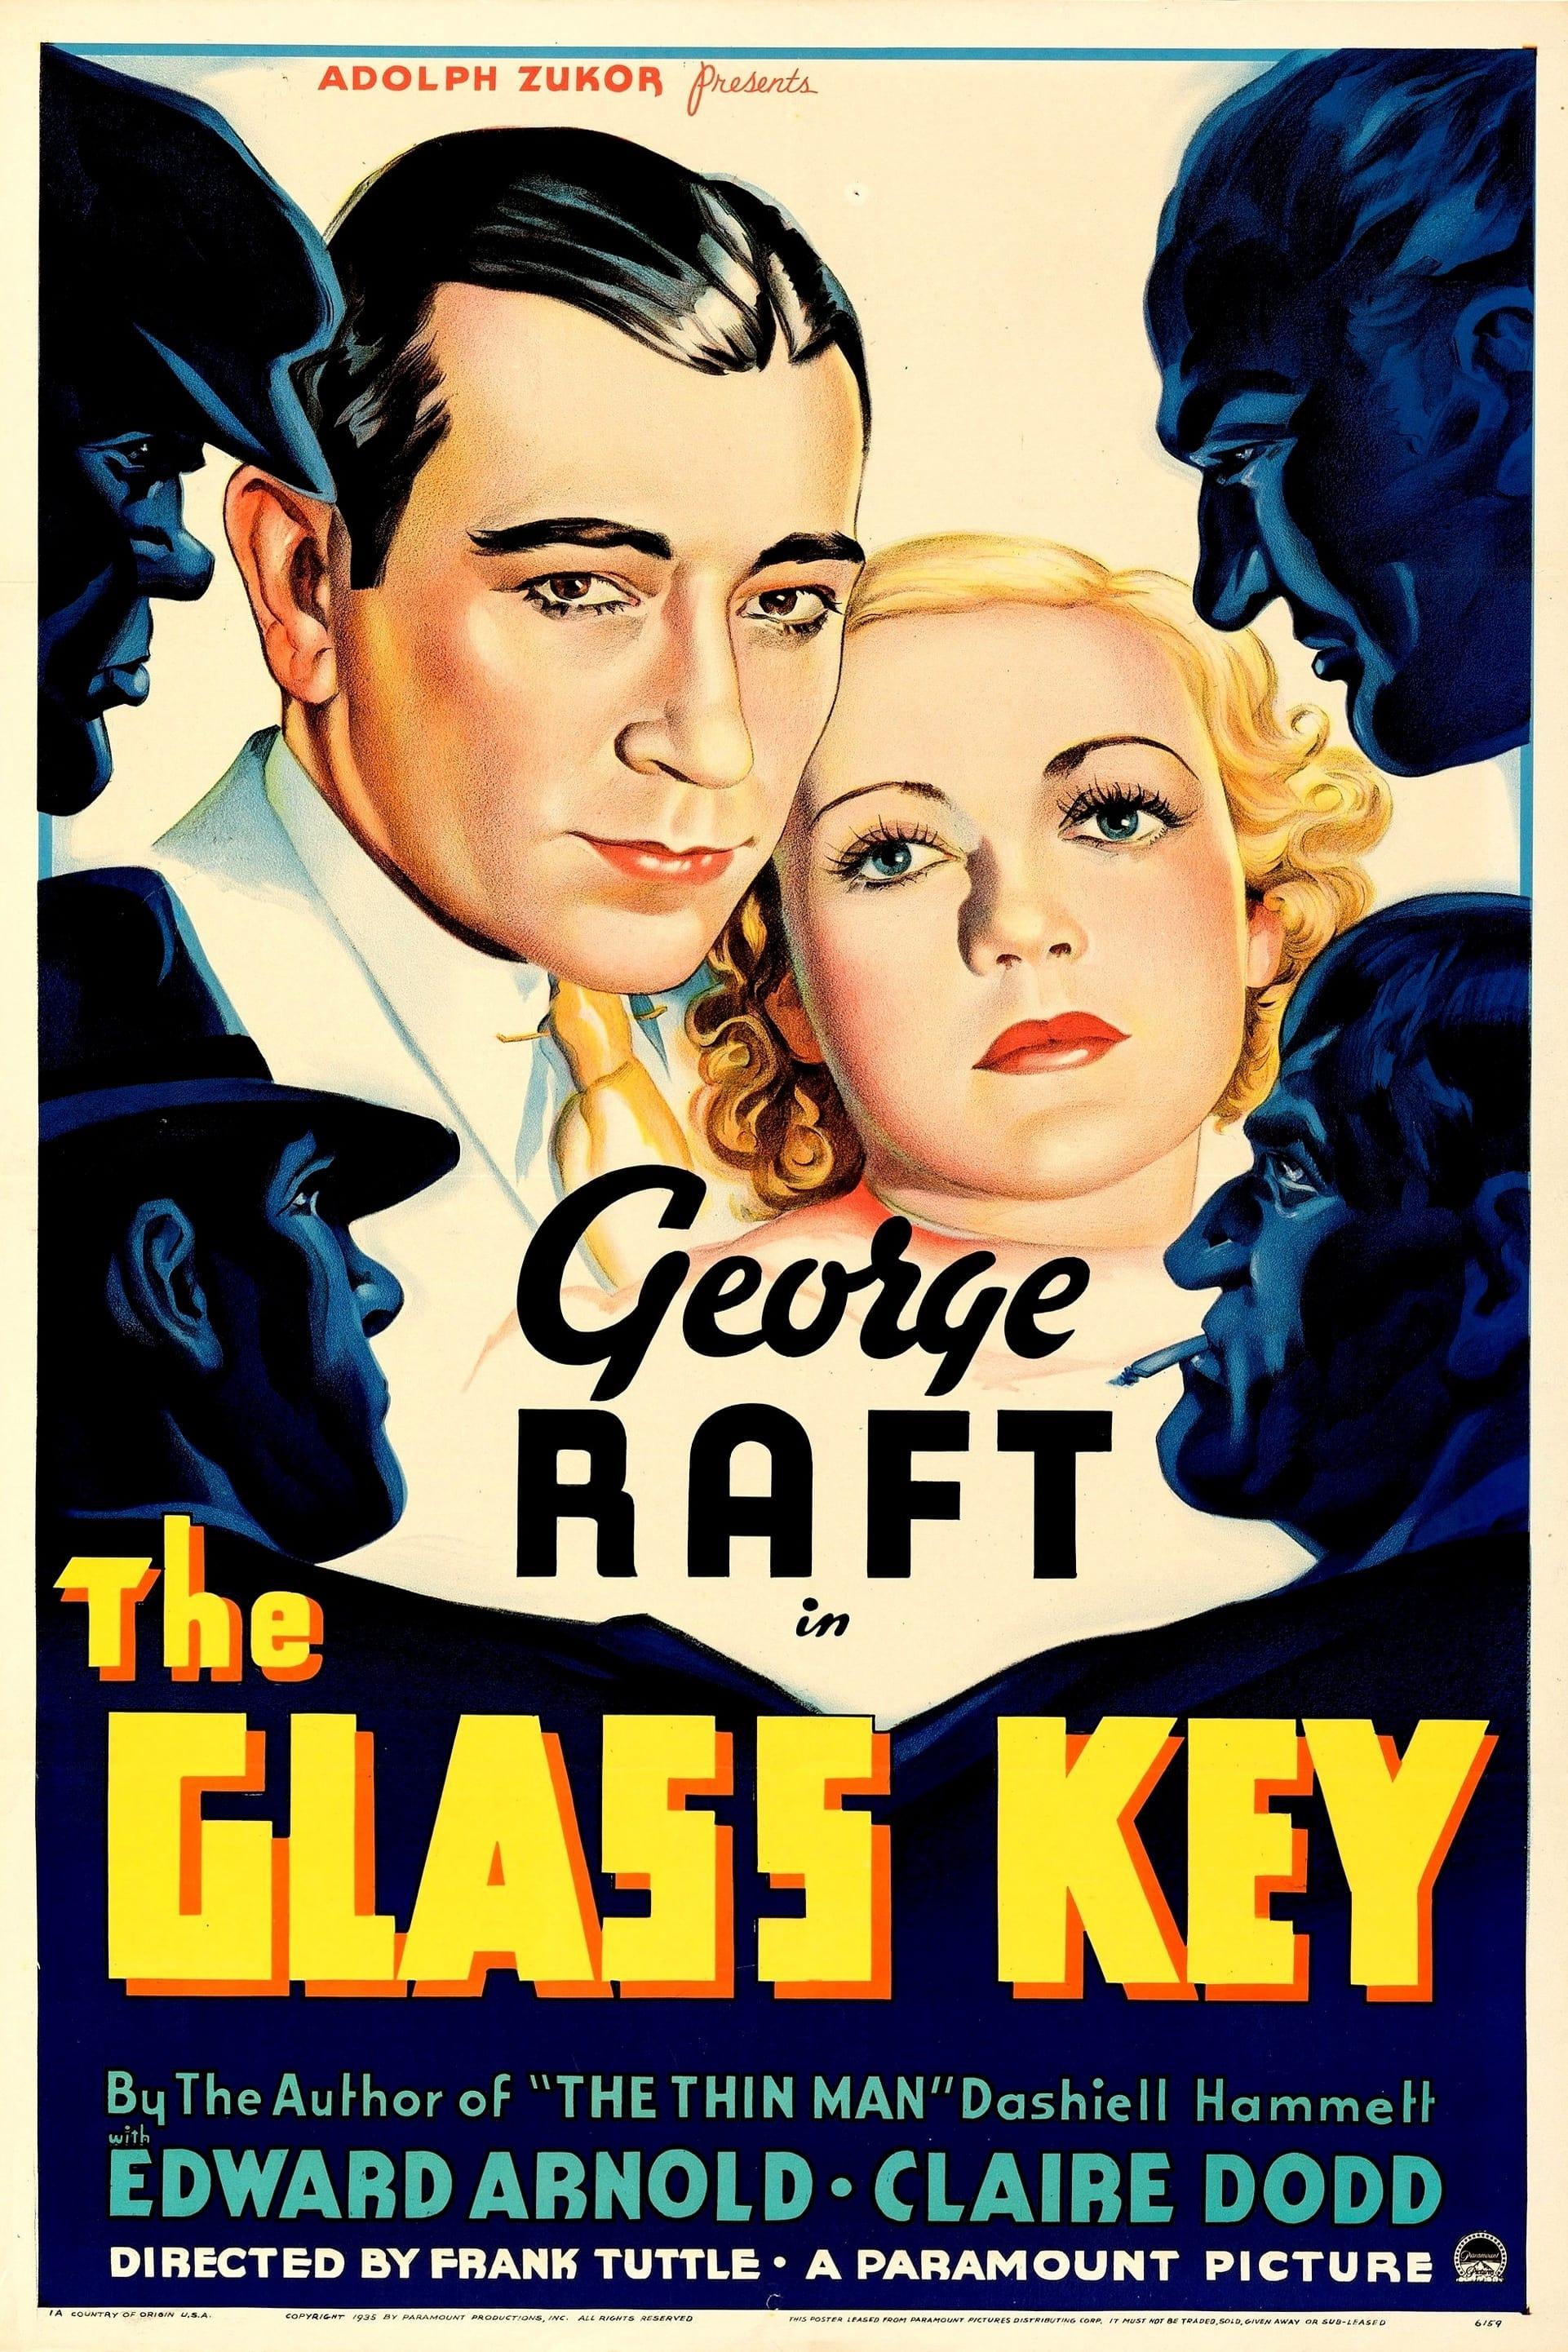 The Glass Key poster